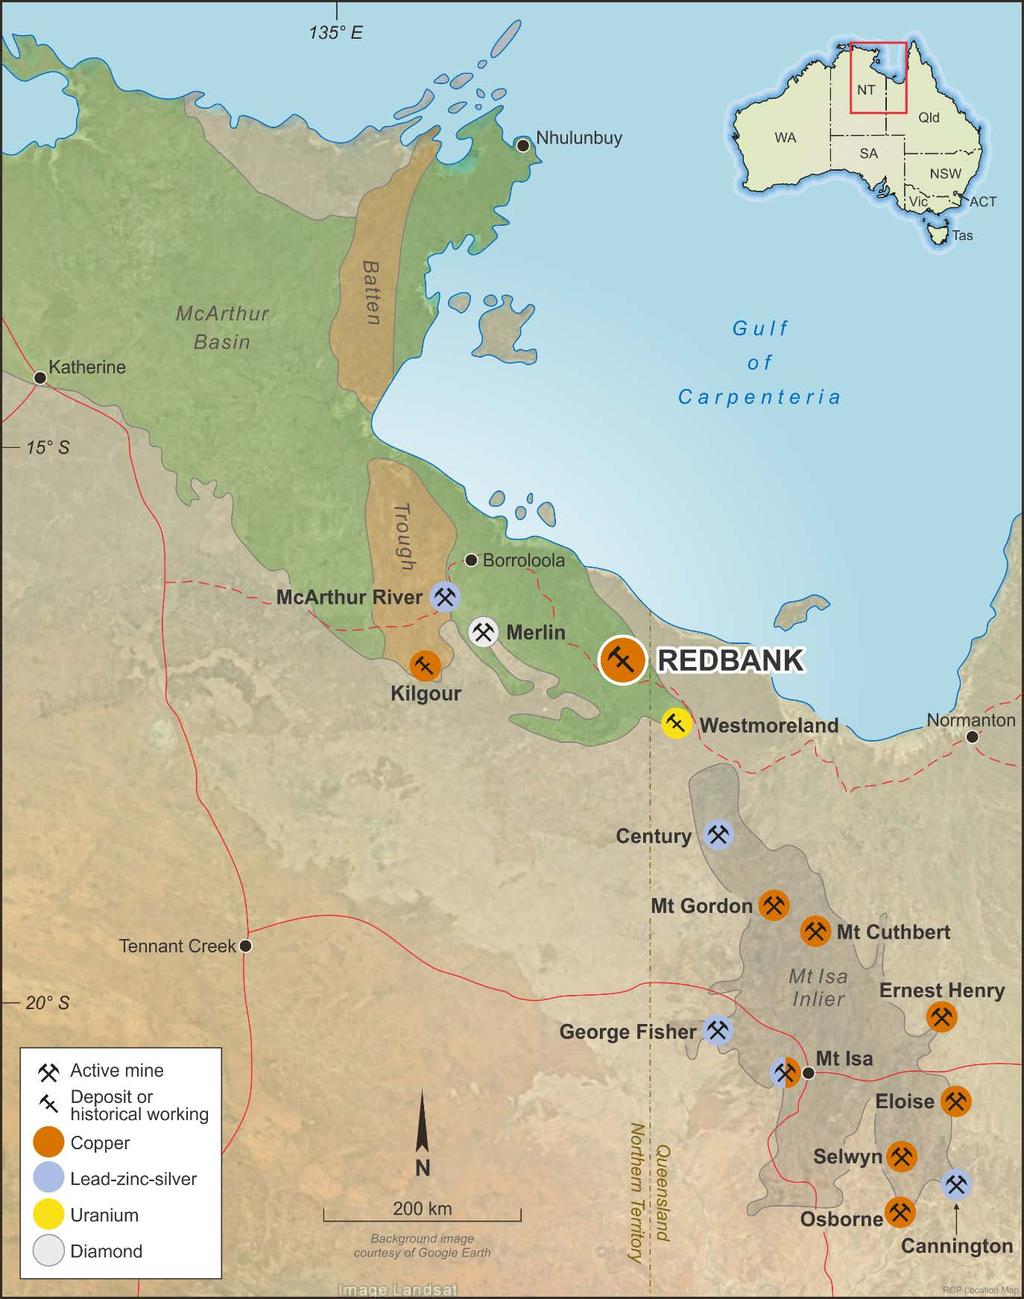 The Company has identified significant additional targets within the immediate Exploration Licence for Retention (ERL94) containing the copper resources, and the surrounding exploration lease